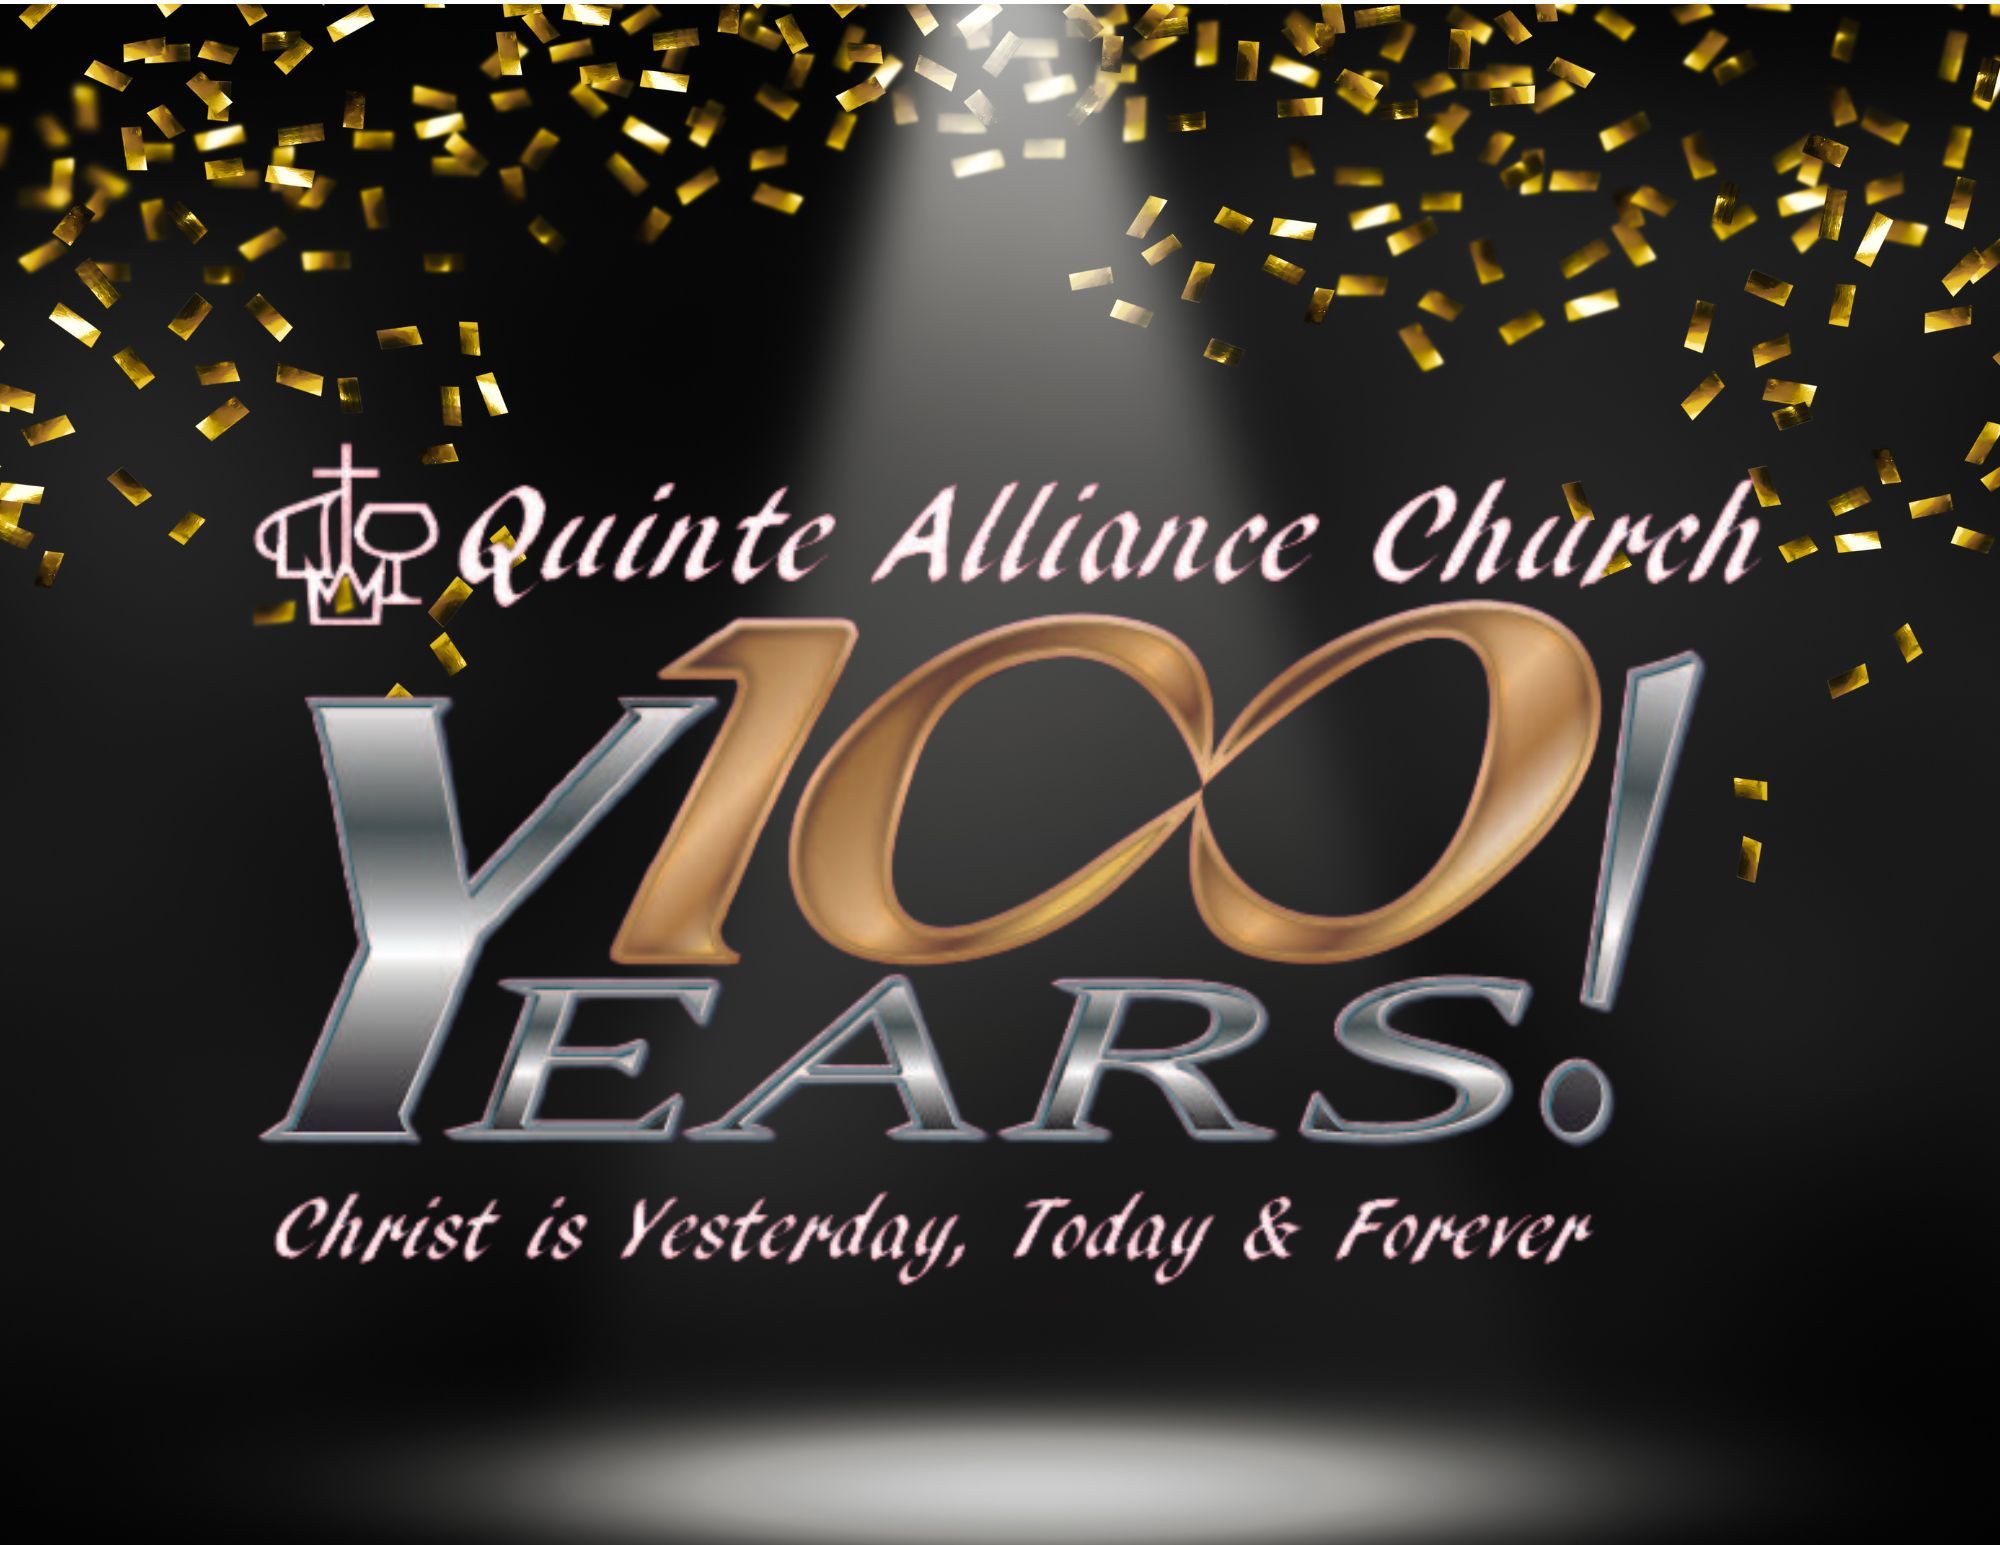 poster titled "Quinte Alliance Church 100 Years"